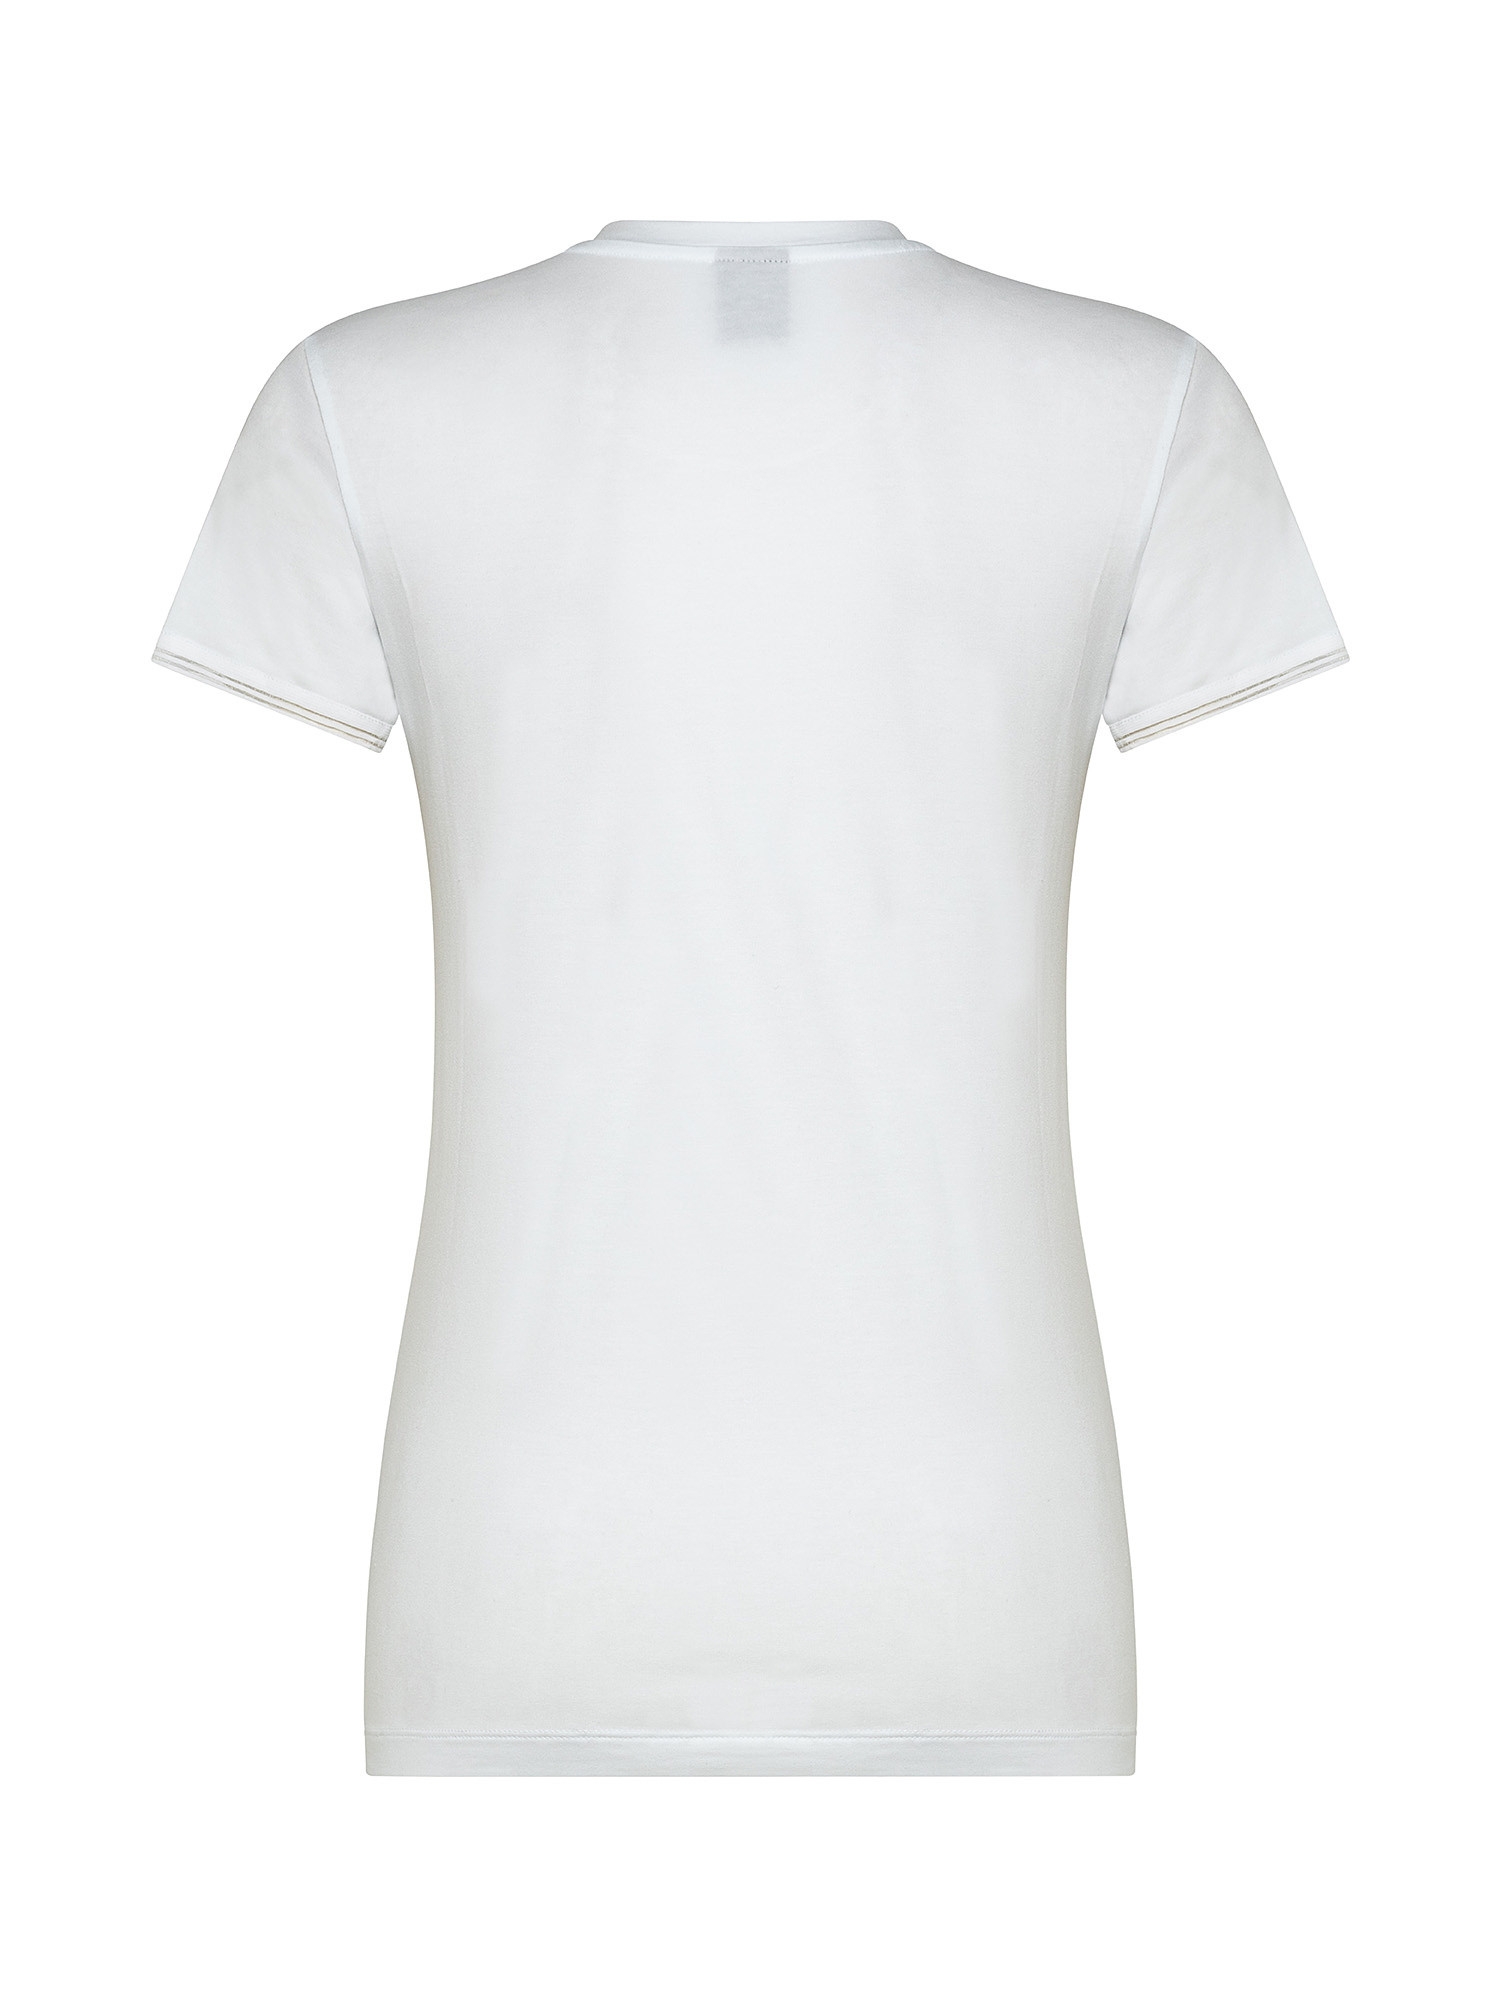 T-shirt con manica corta, Bianco, large image number 1